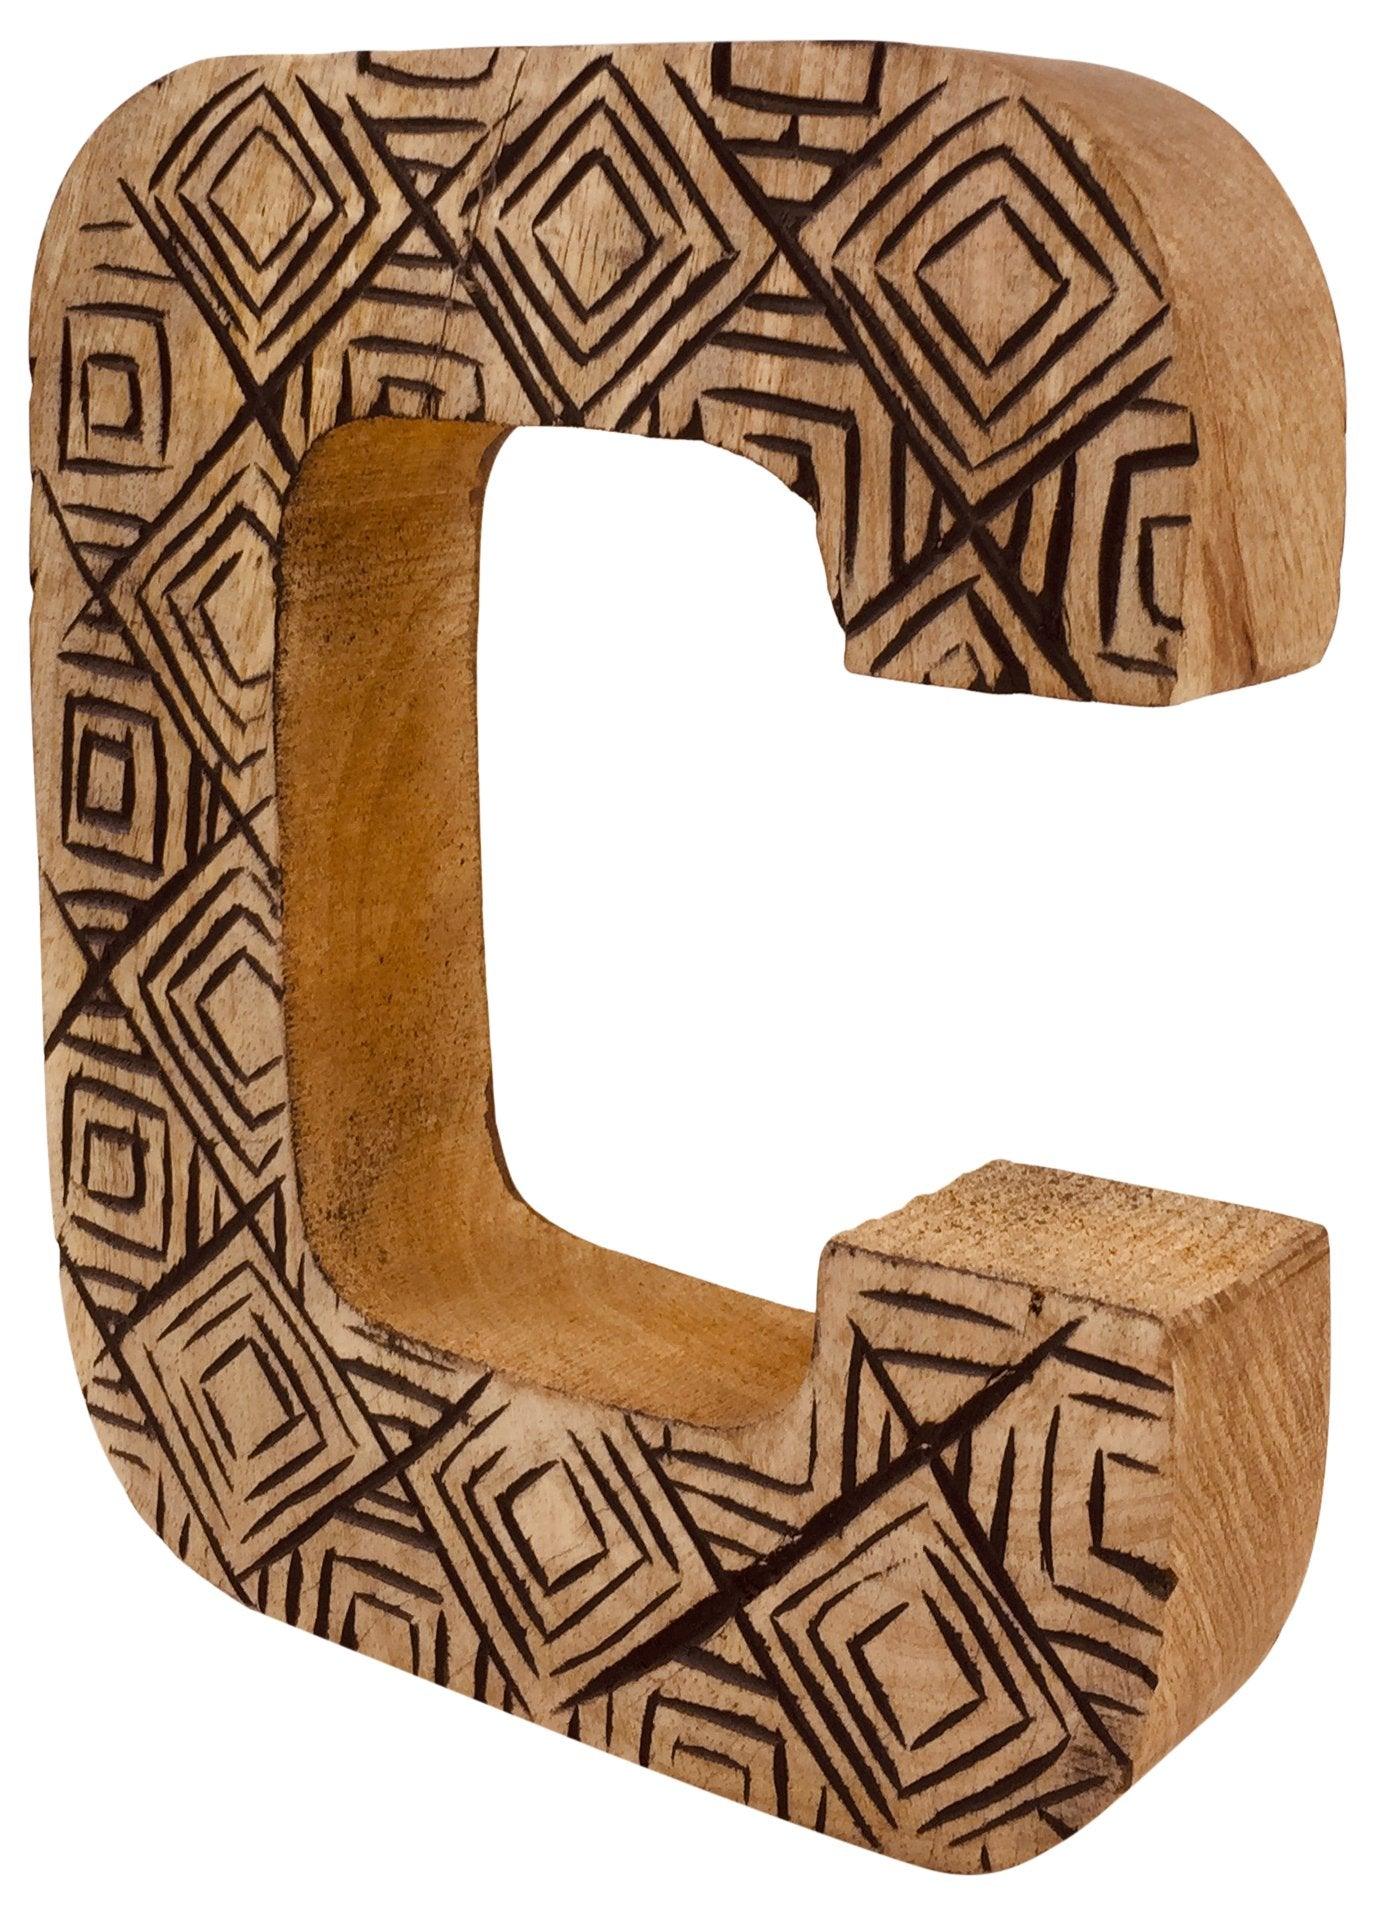 View Hand Carved Wooden Geometric Letter C information